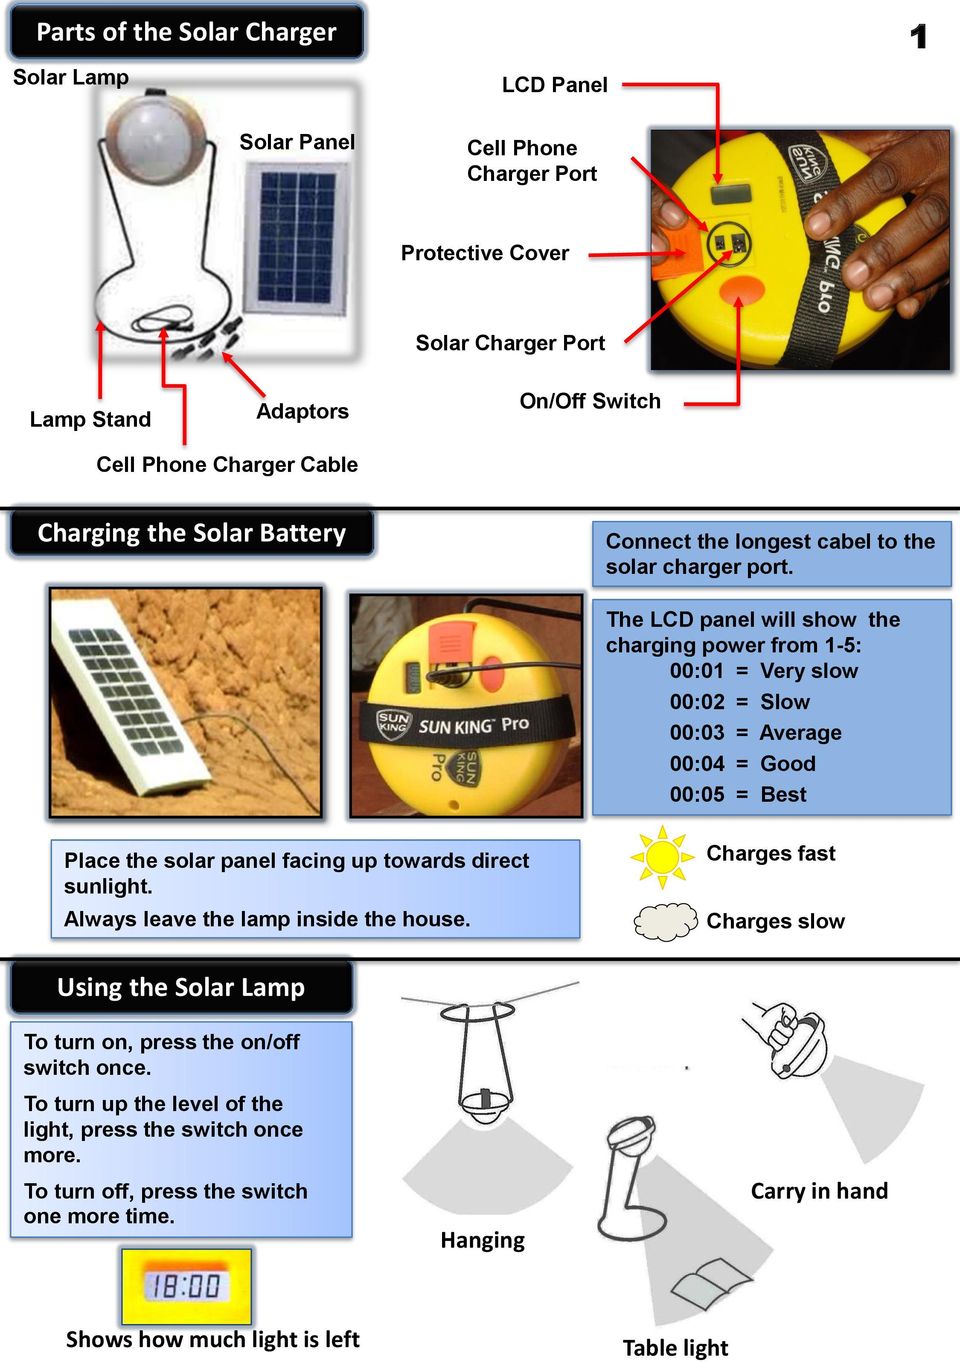 The LCD panel will show the charging power from 1-5: 00:01 = Very slow 00:02 = Slow 00:03 = Average 00:04 = Good 00:05 = Best Place the solar panel facing up towards direct sunlight.